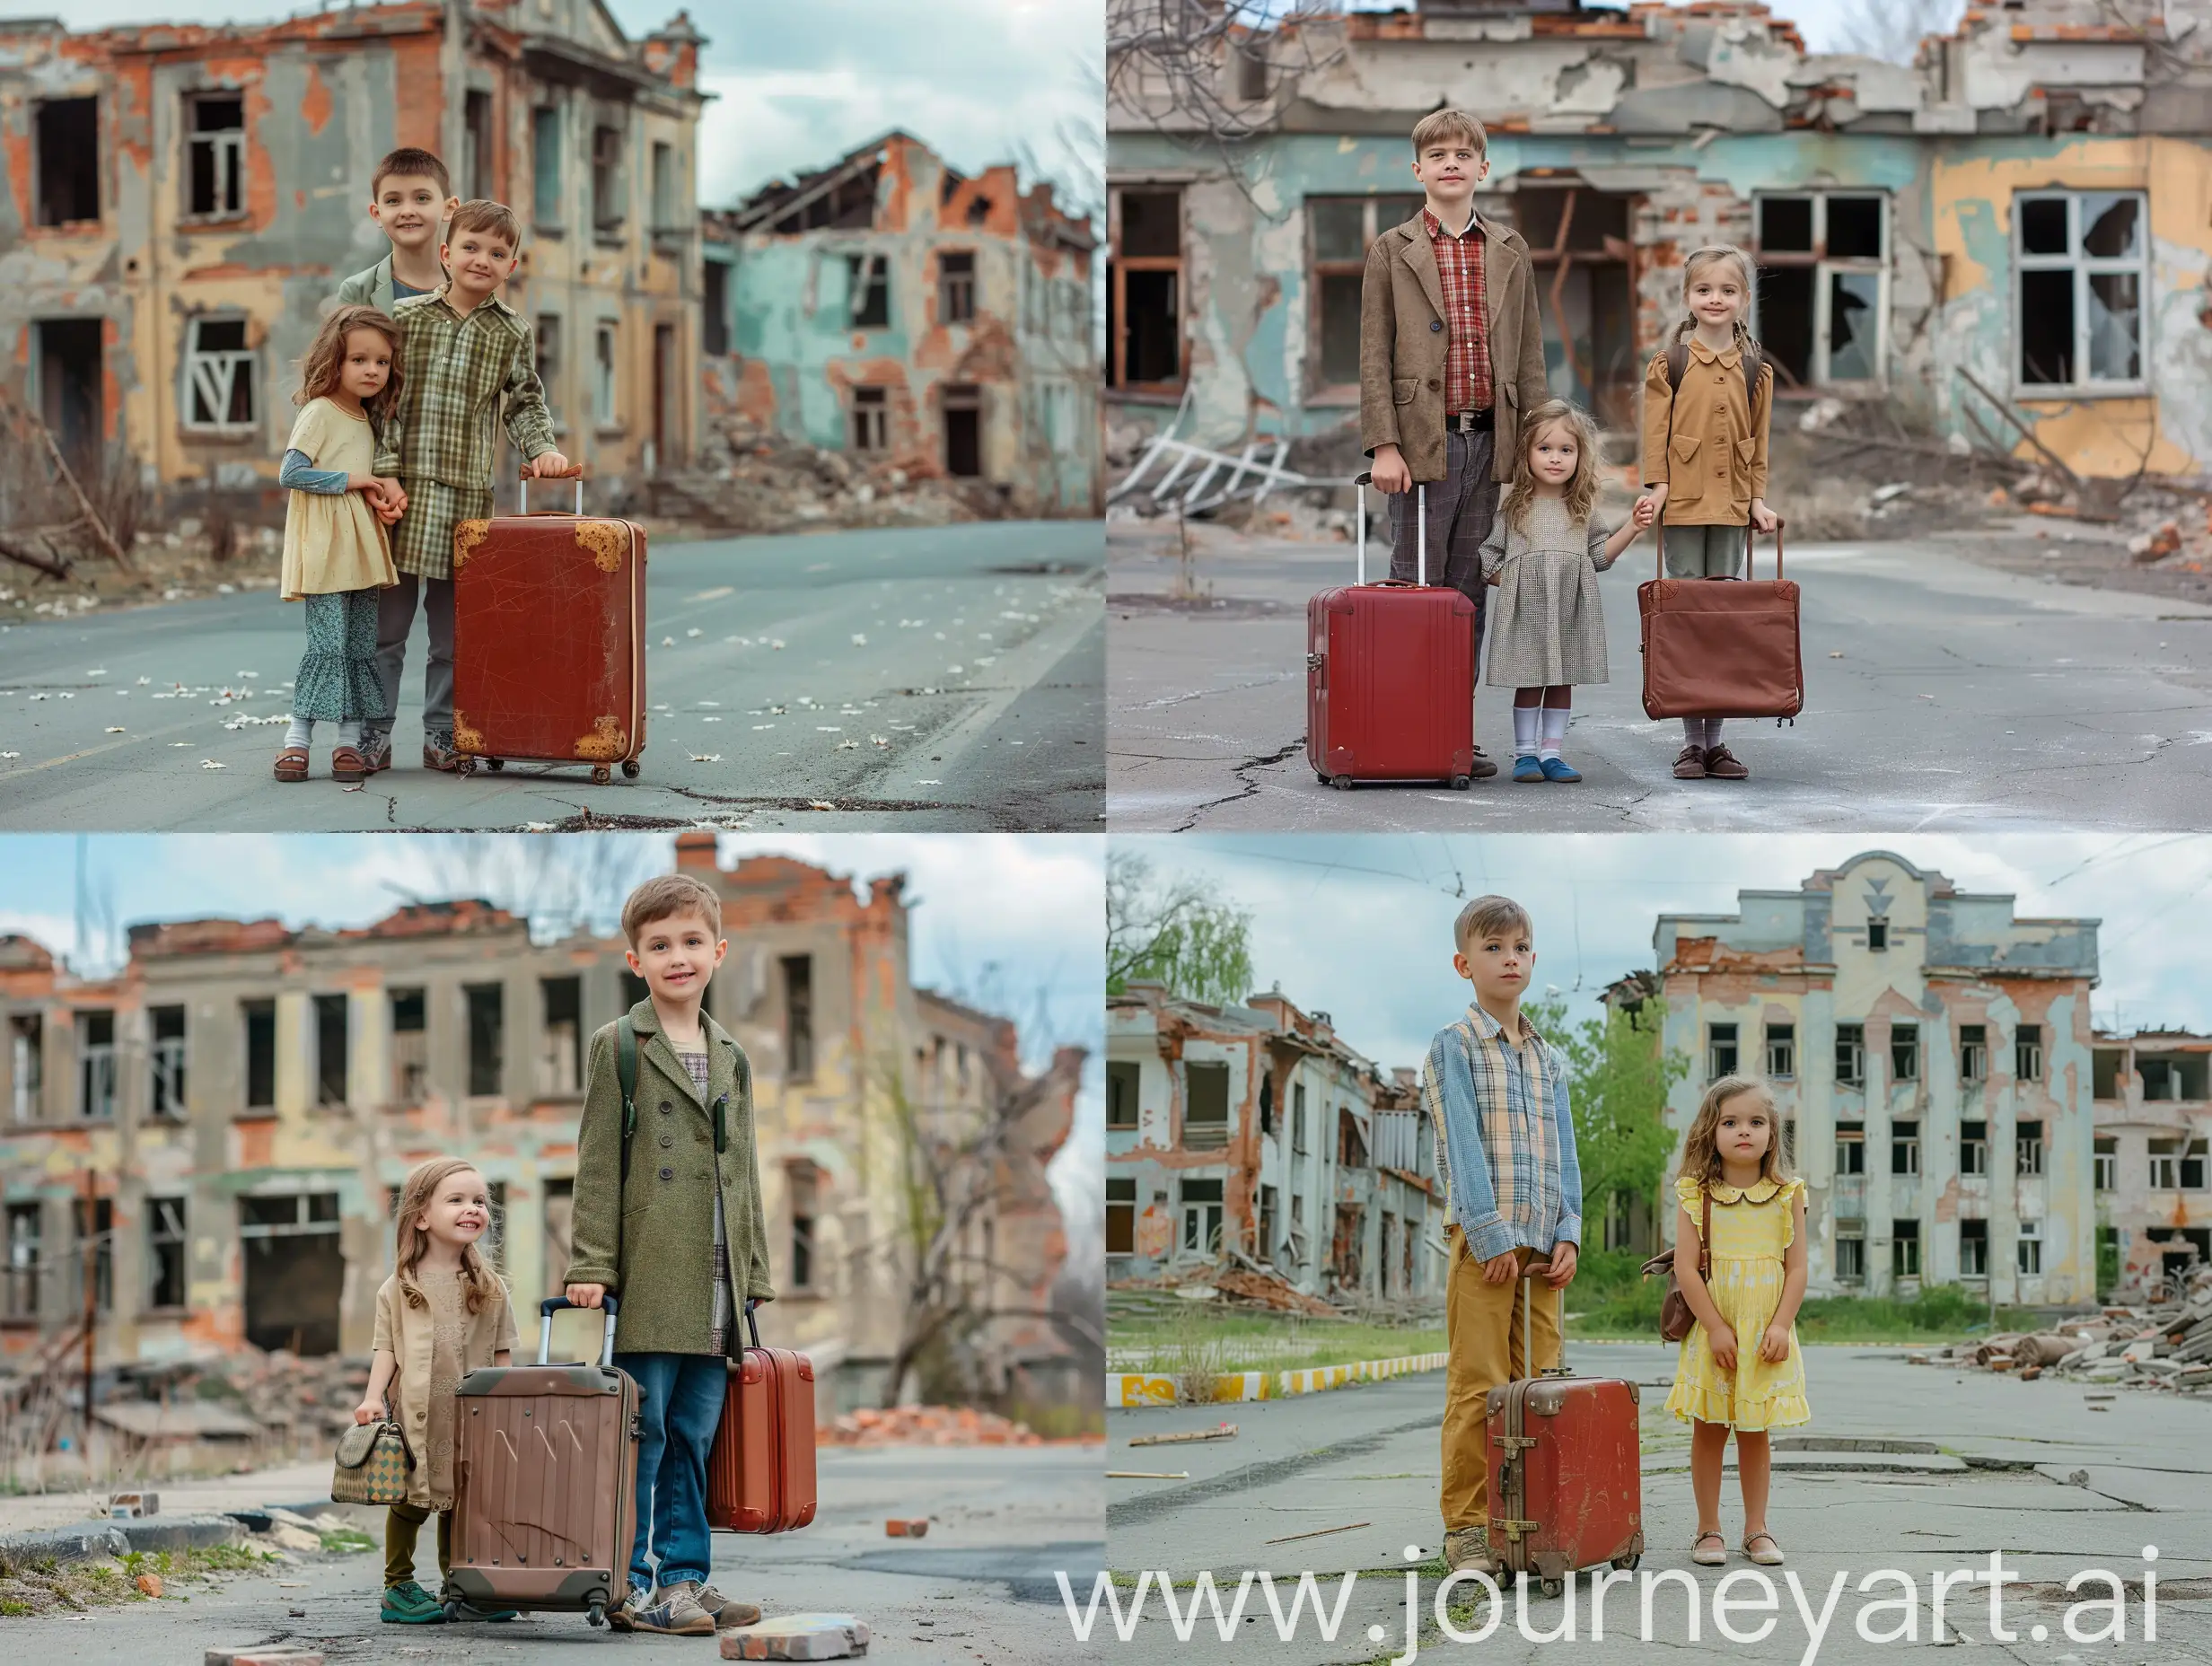 Joyful-Children-with-Suitcases-in-Front-of-a-Ruined-School-Building